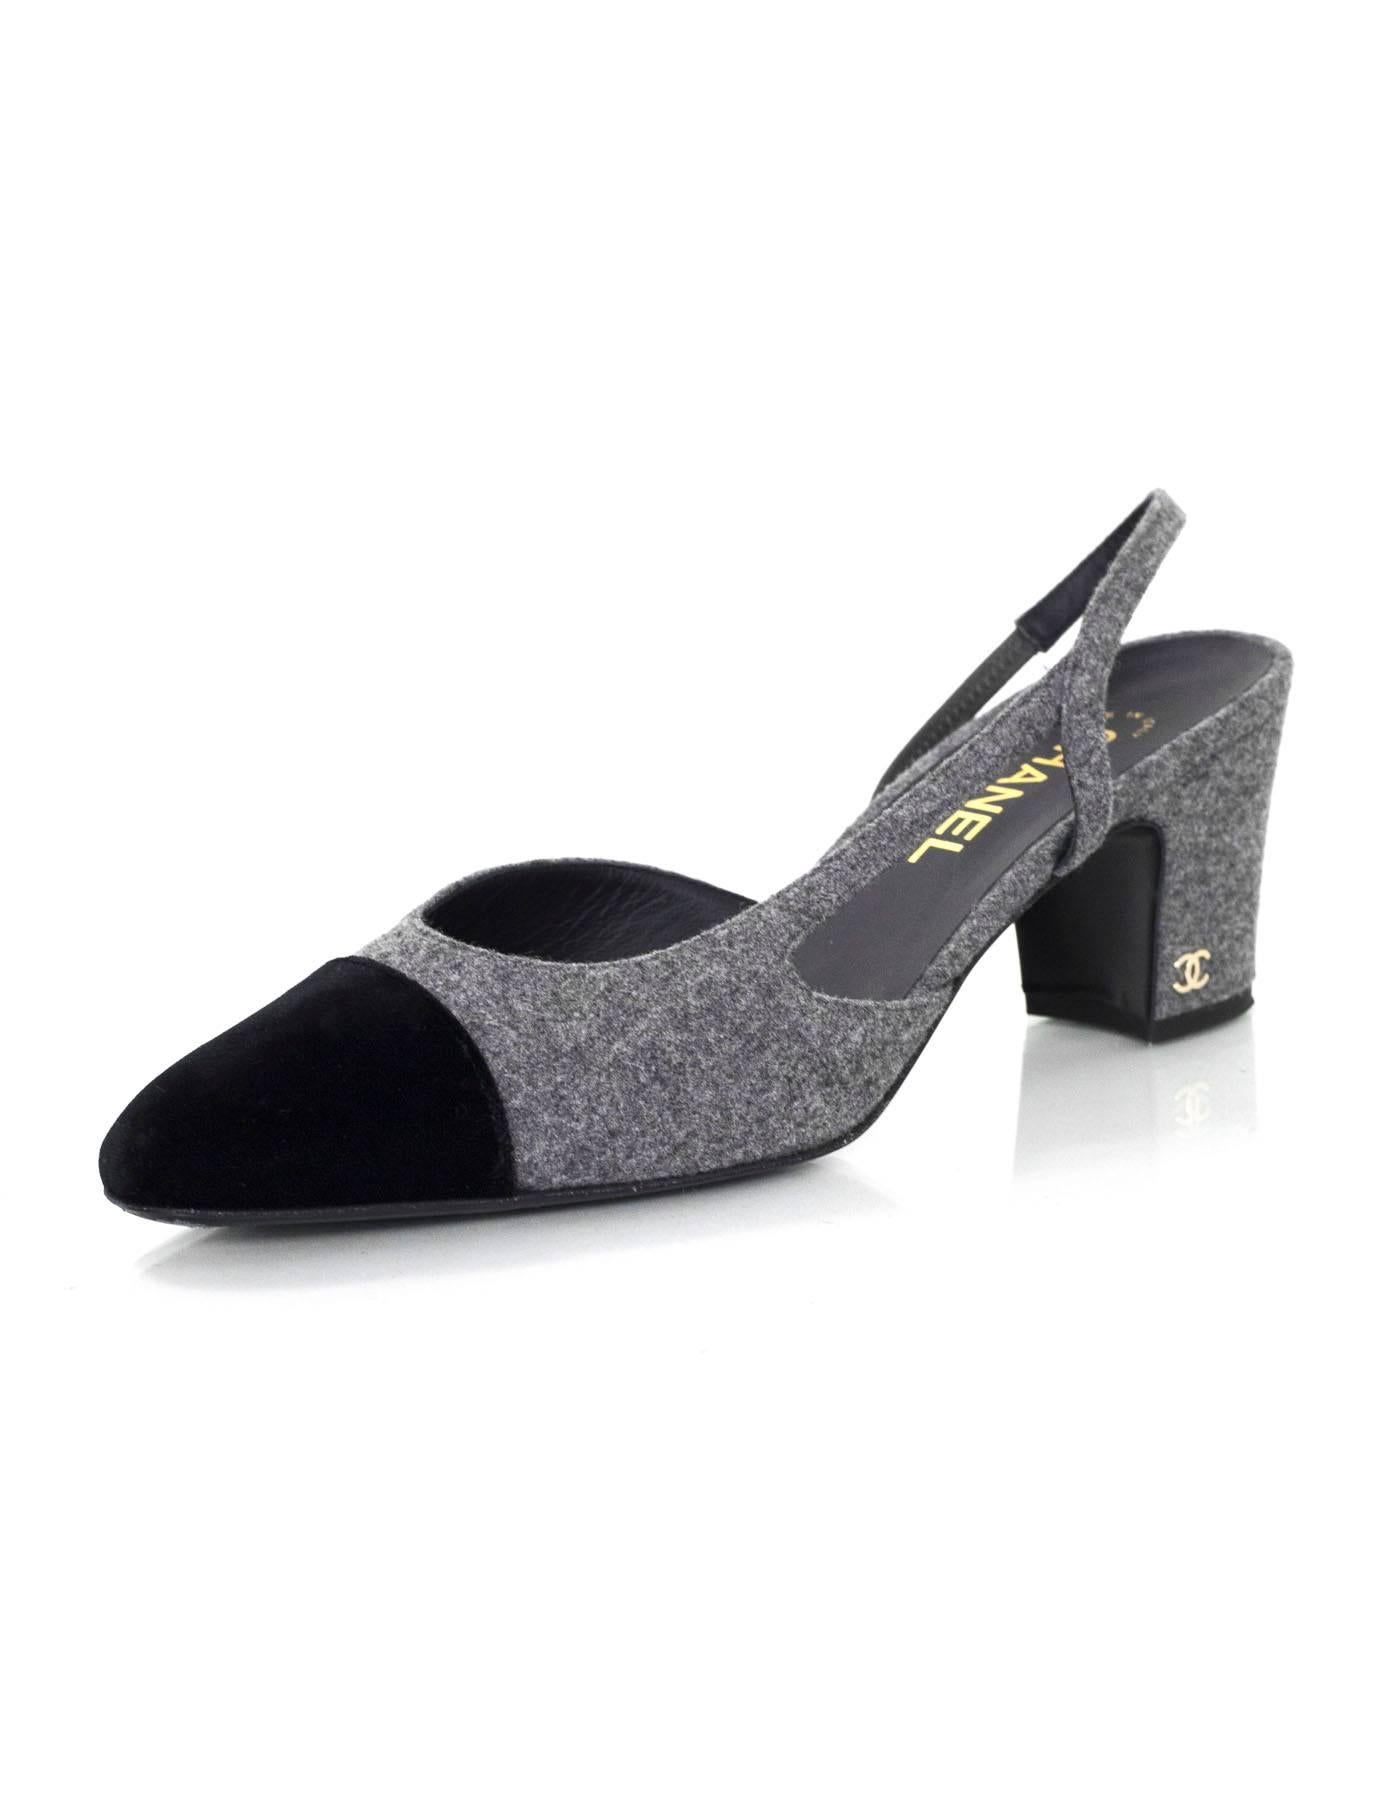 Chanel Black and Grey Slingback Pumps Sz 41
Features grey felt throughout and black velvet cap toes

Made In: Italy
Color: Black and grey
Closure/Opening: Slingback strap
Sole Stamp: CC Made in Italy 41
Overall Condition: Excellent pre-owned